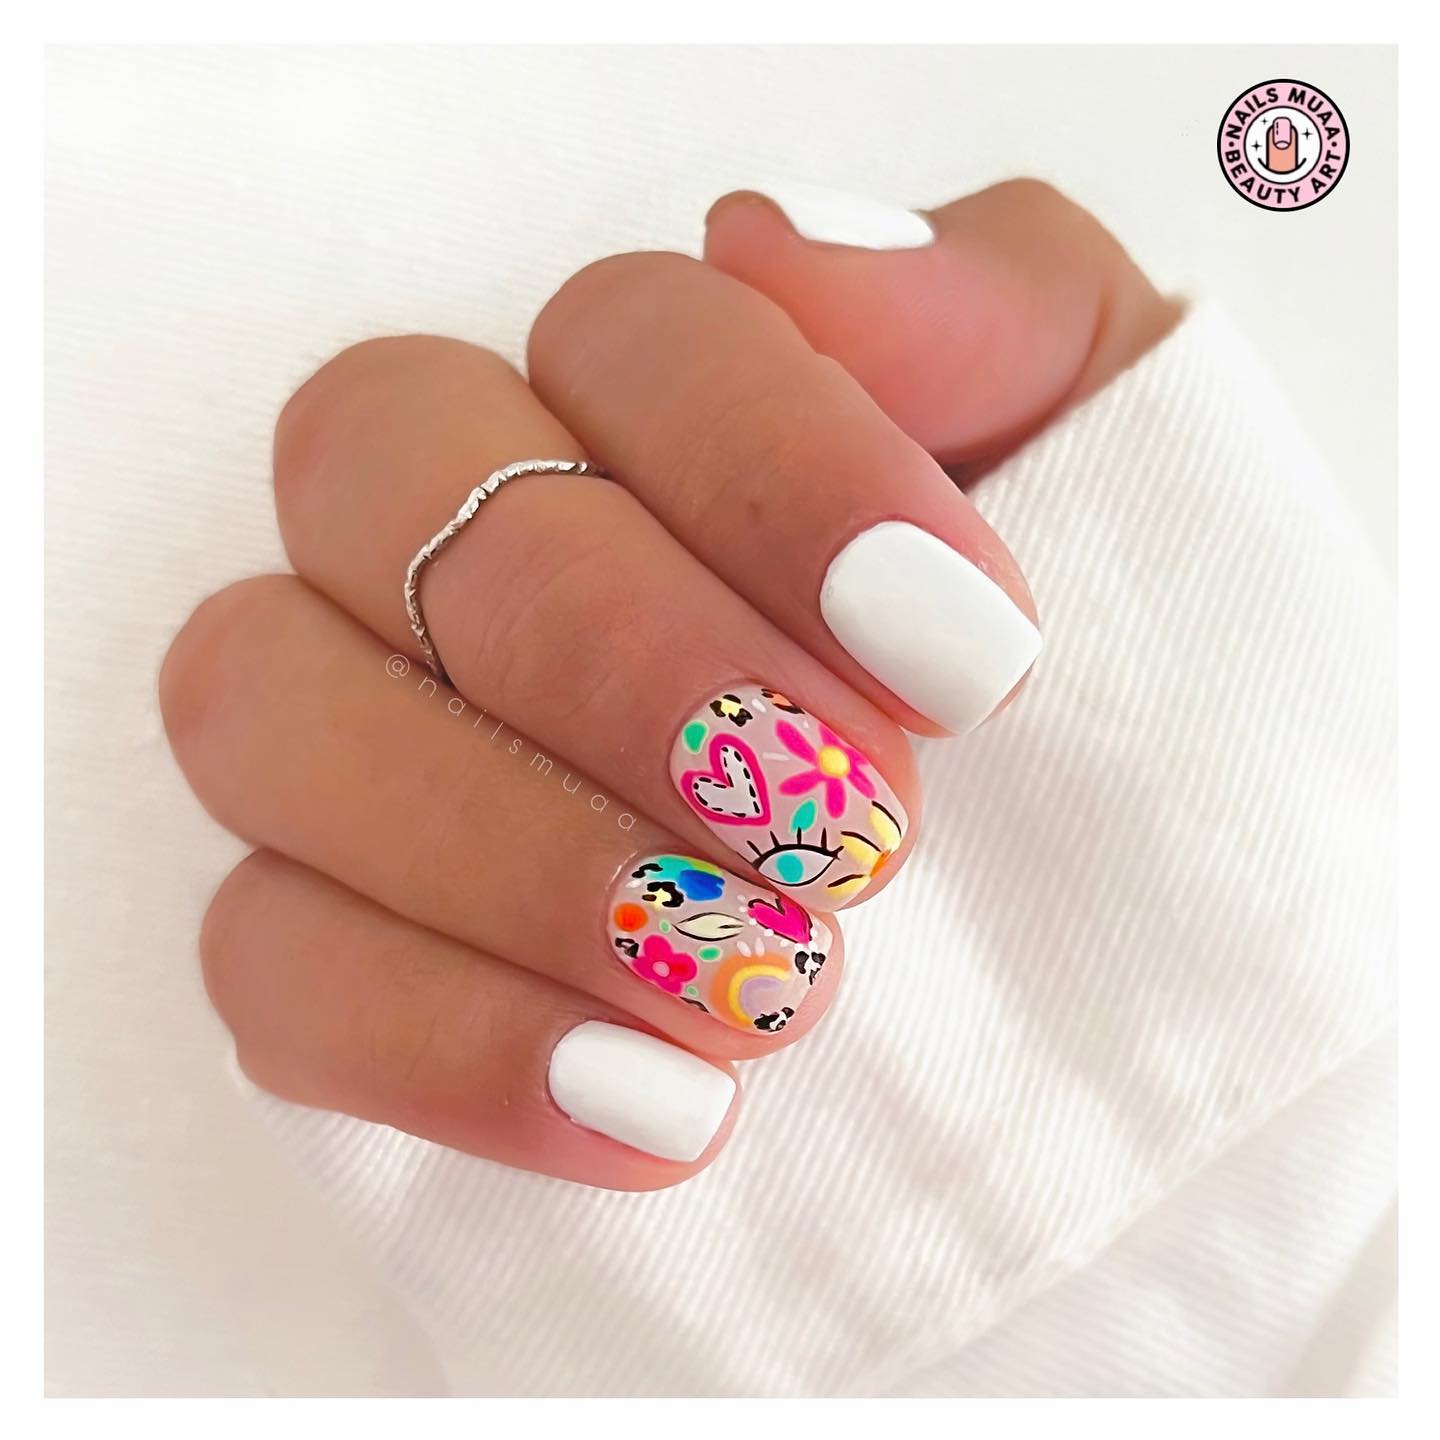 100 Pretty Spring Nail Designs To Try This Year images 56